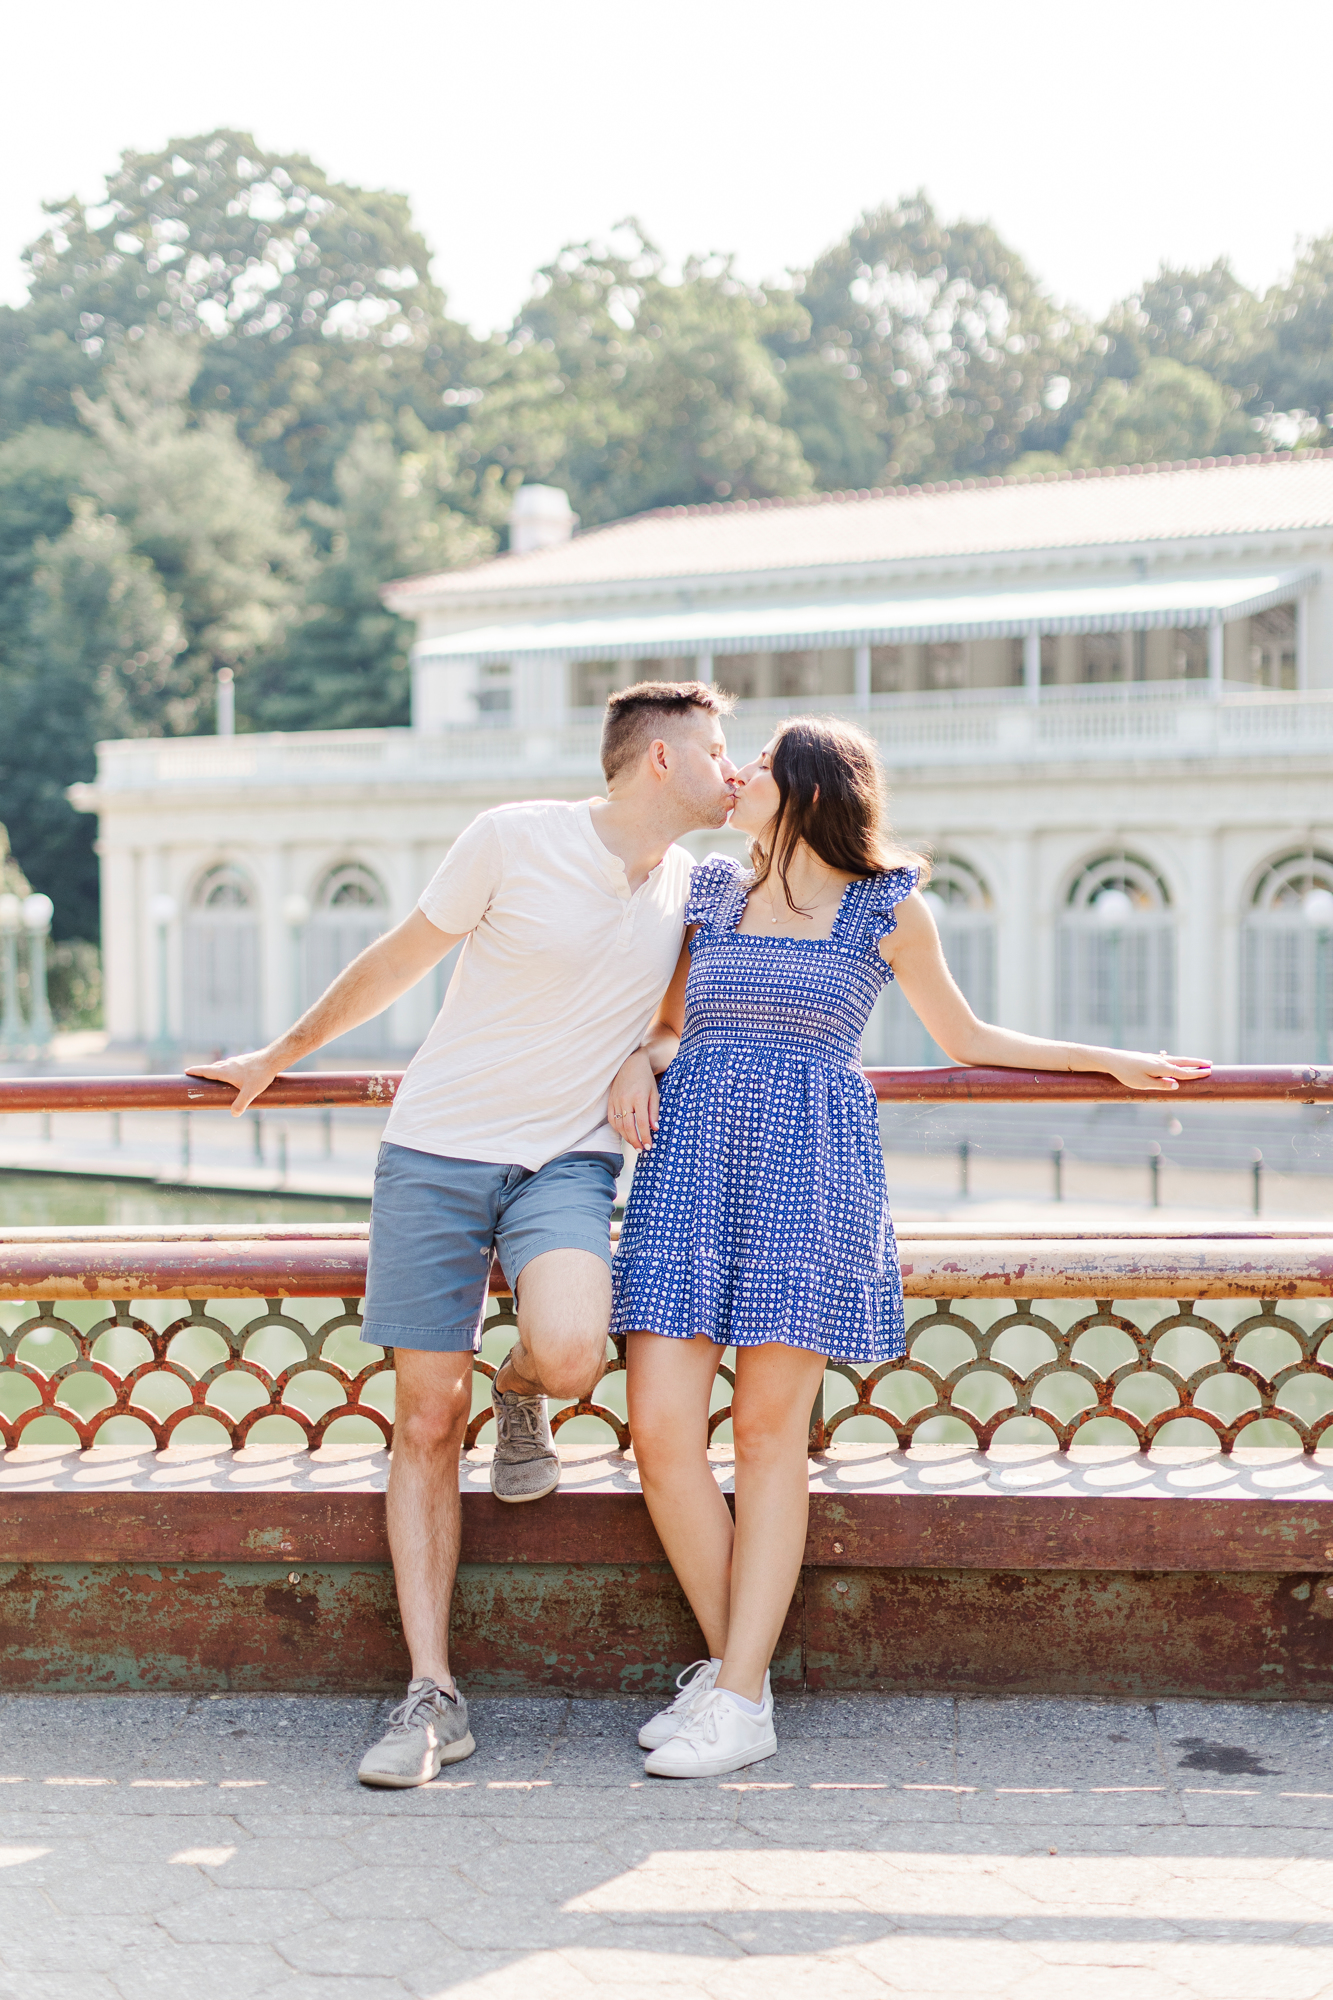 Intimate engagement session in Prospect Park